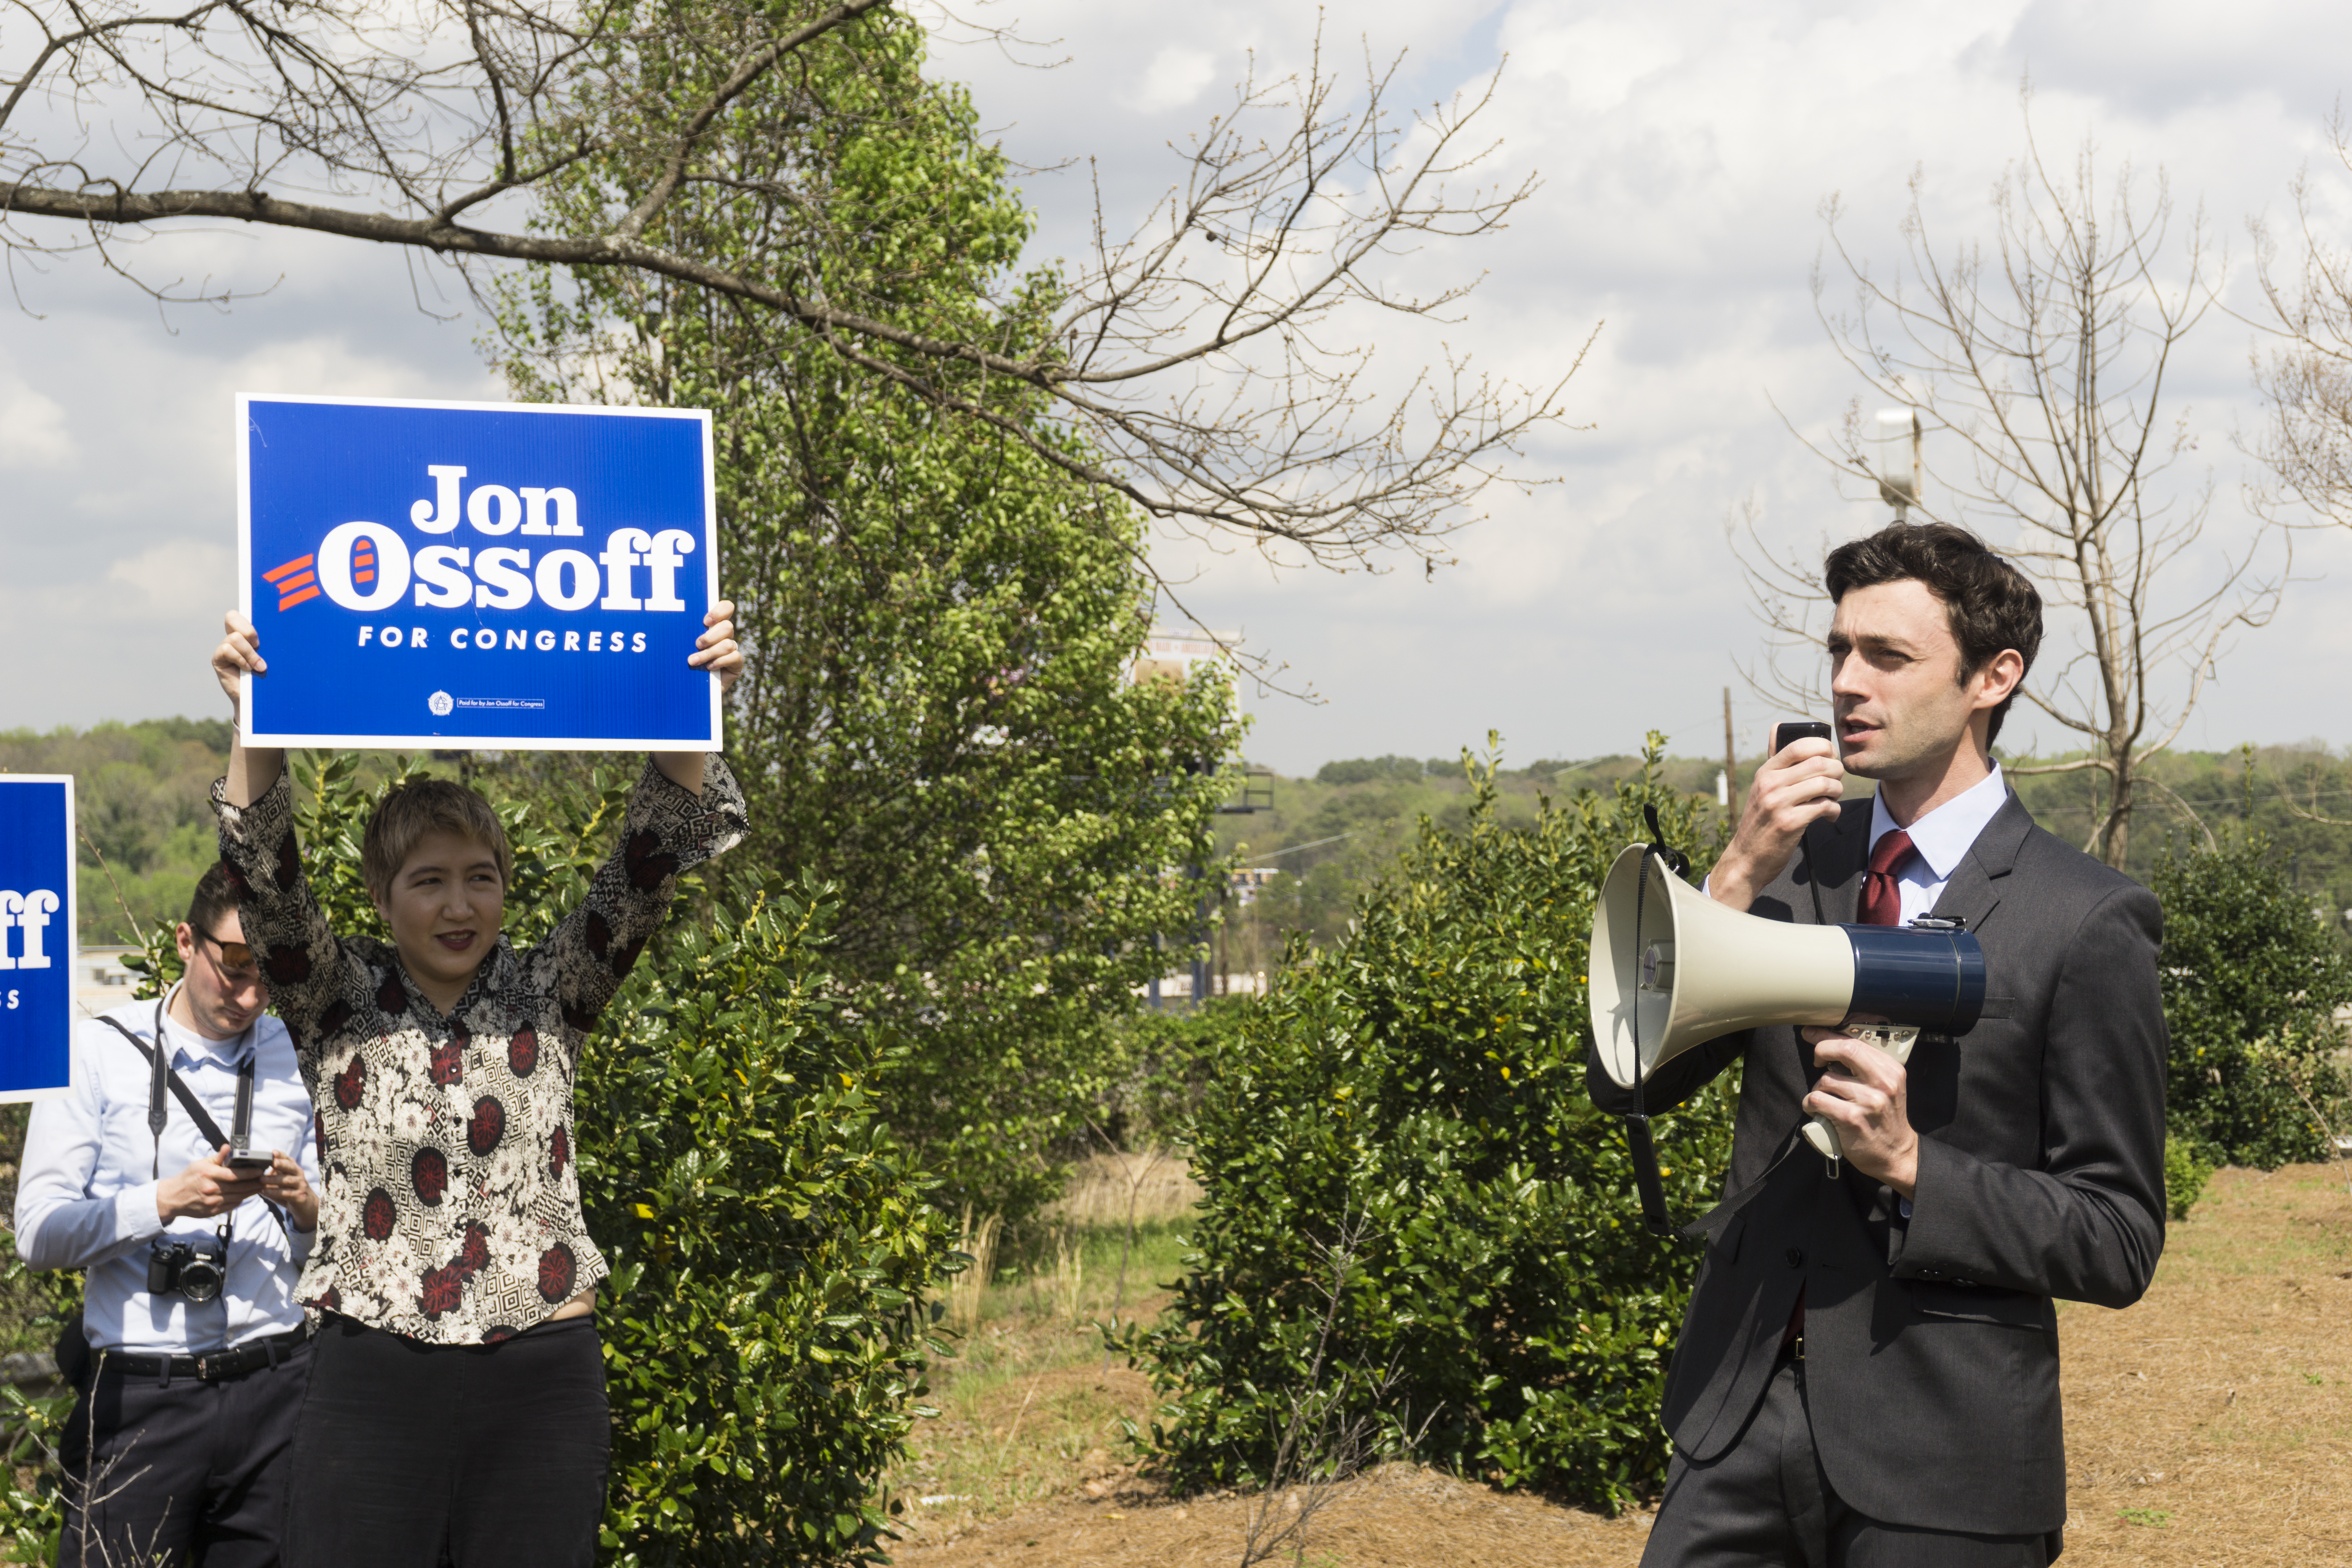 Jon Ossof during his 2017 congressional campaign